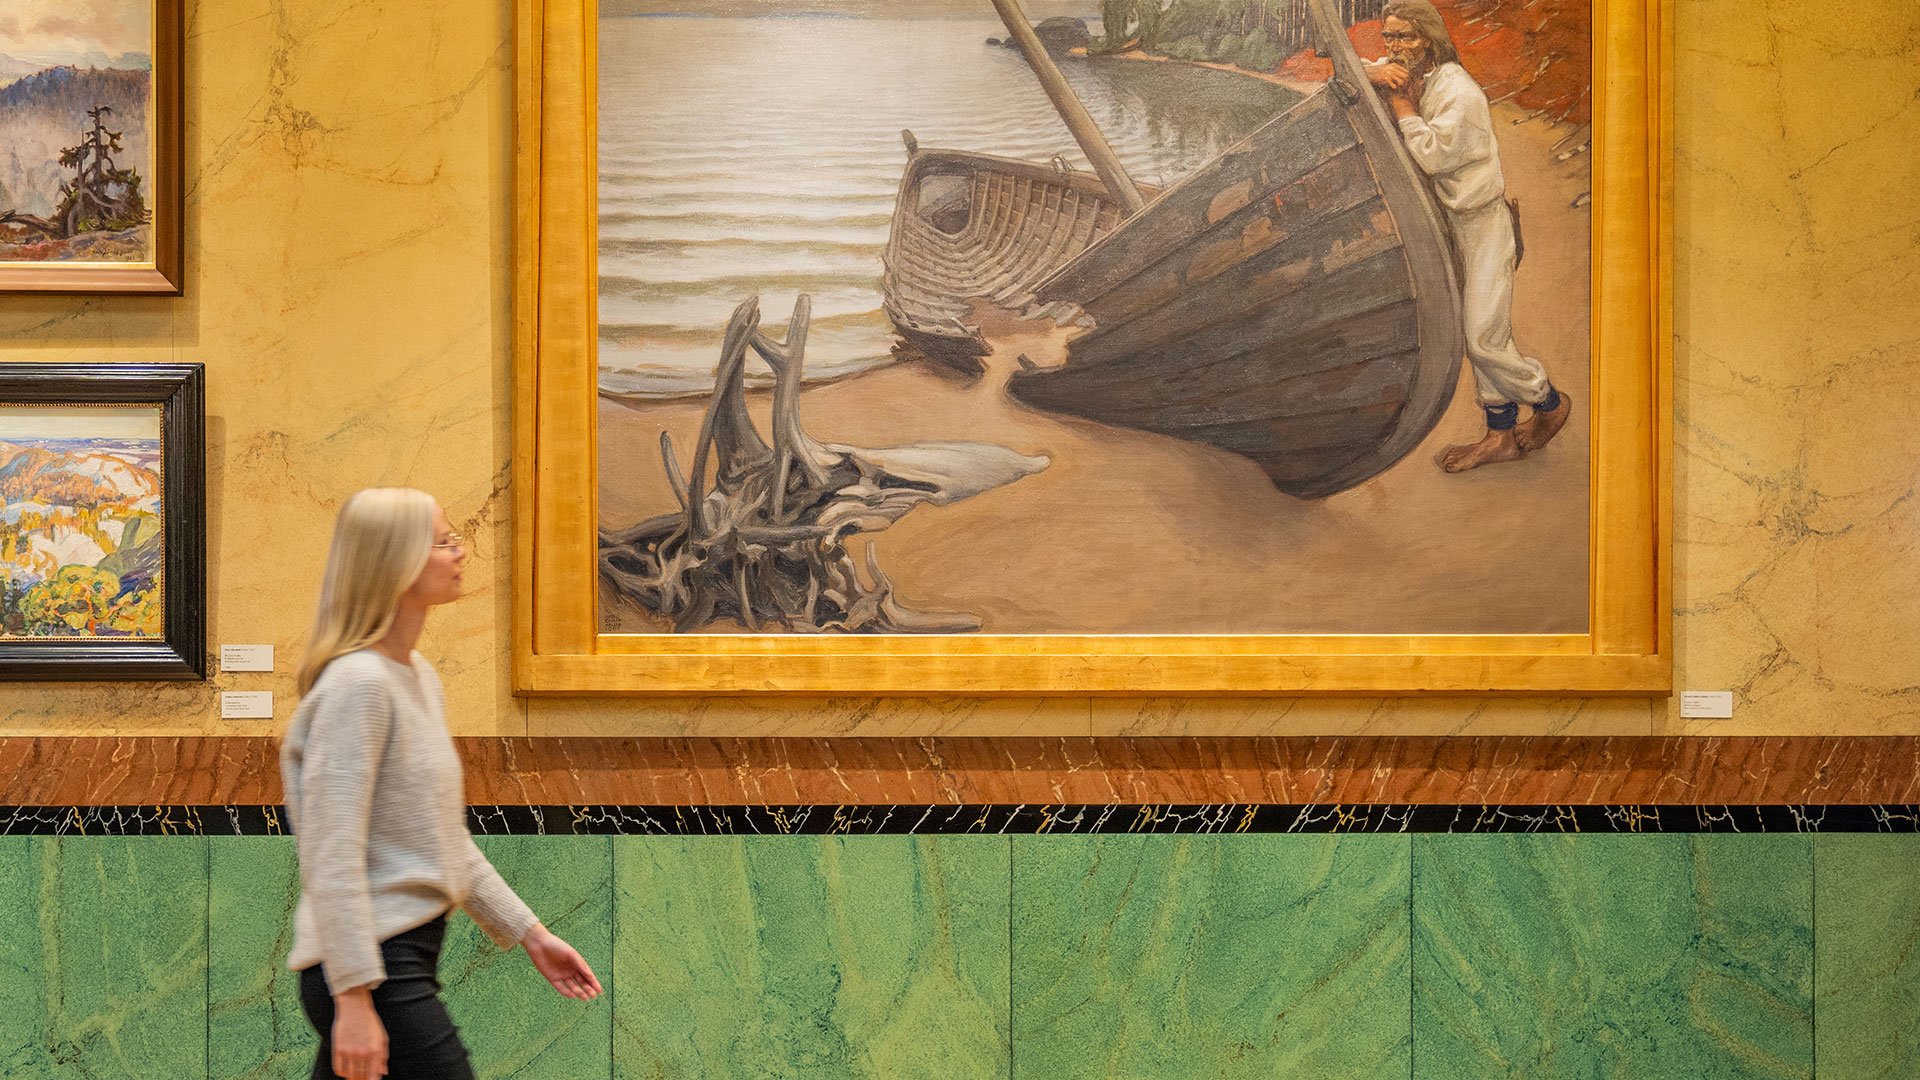 A woman walking by a painting at an art gallery.